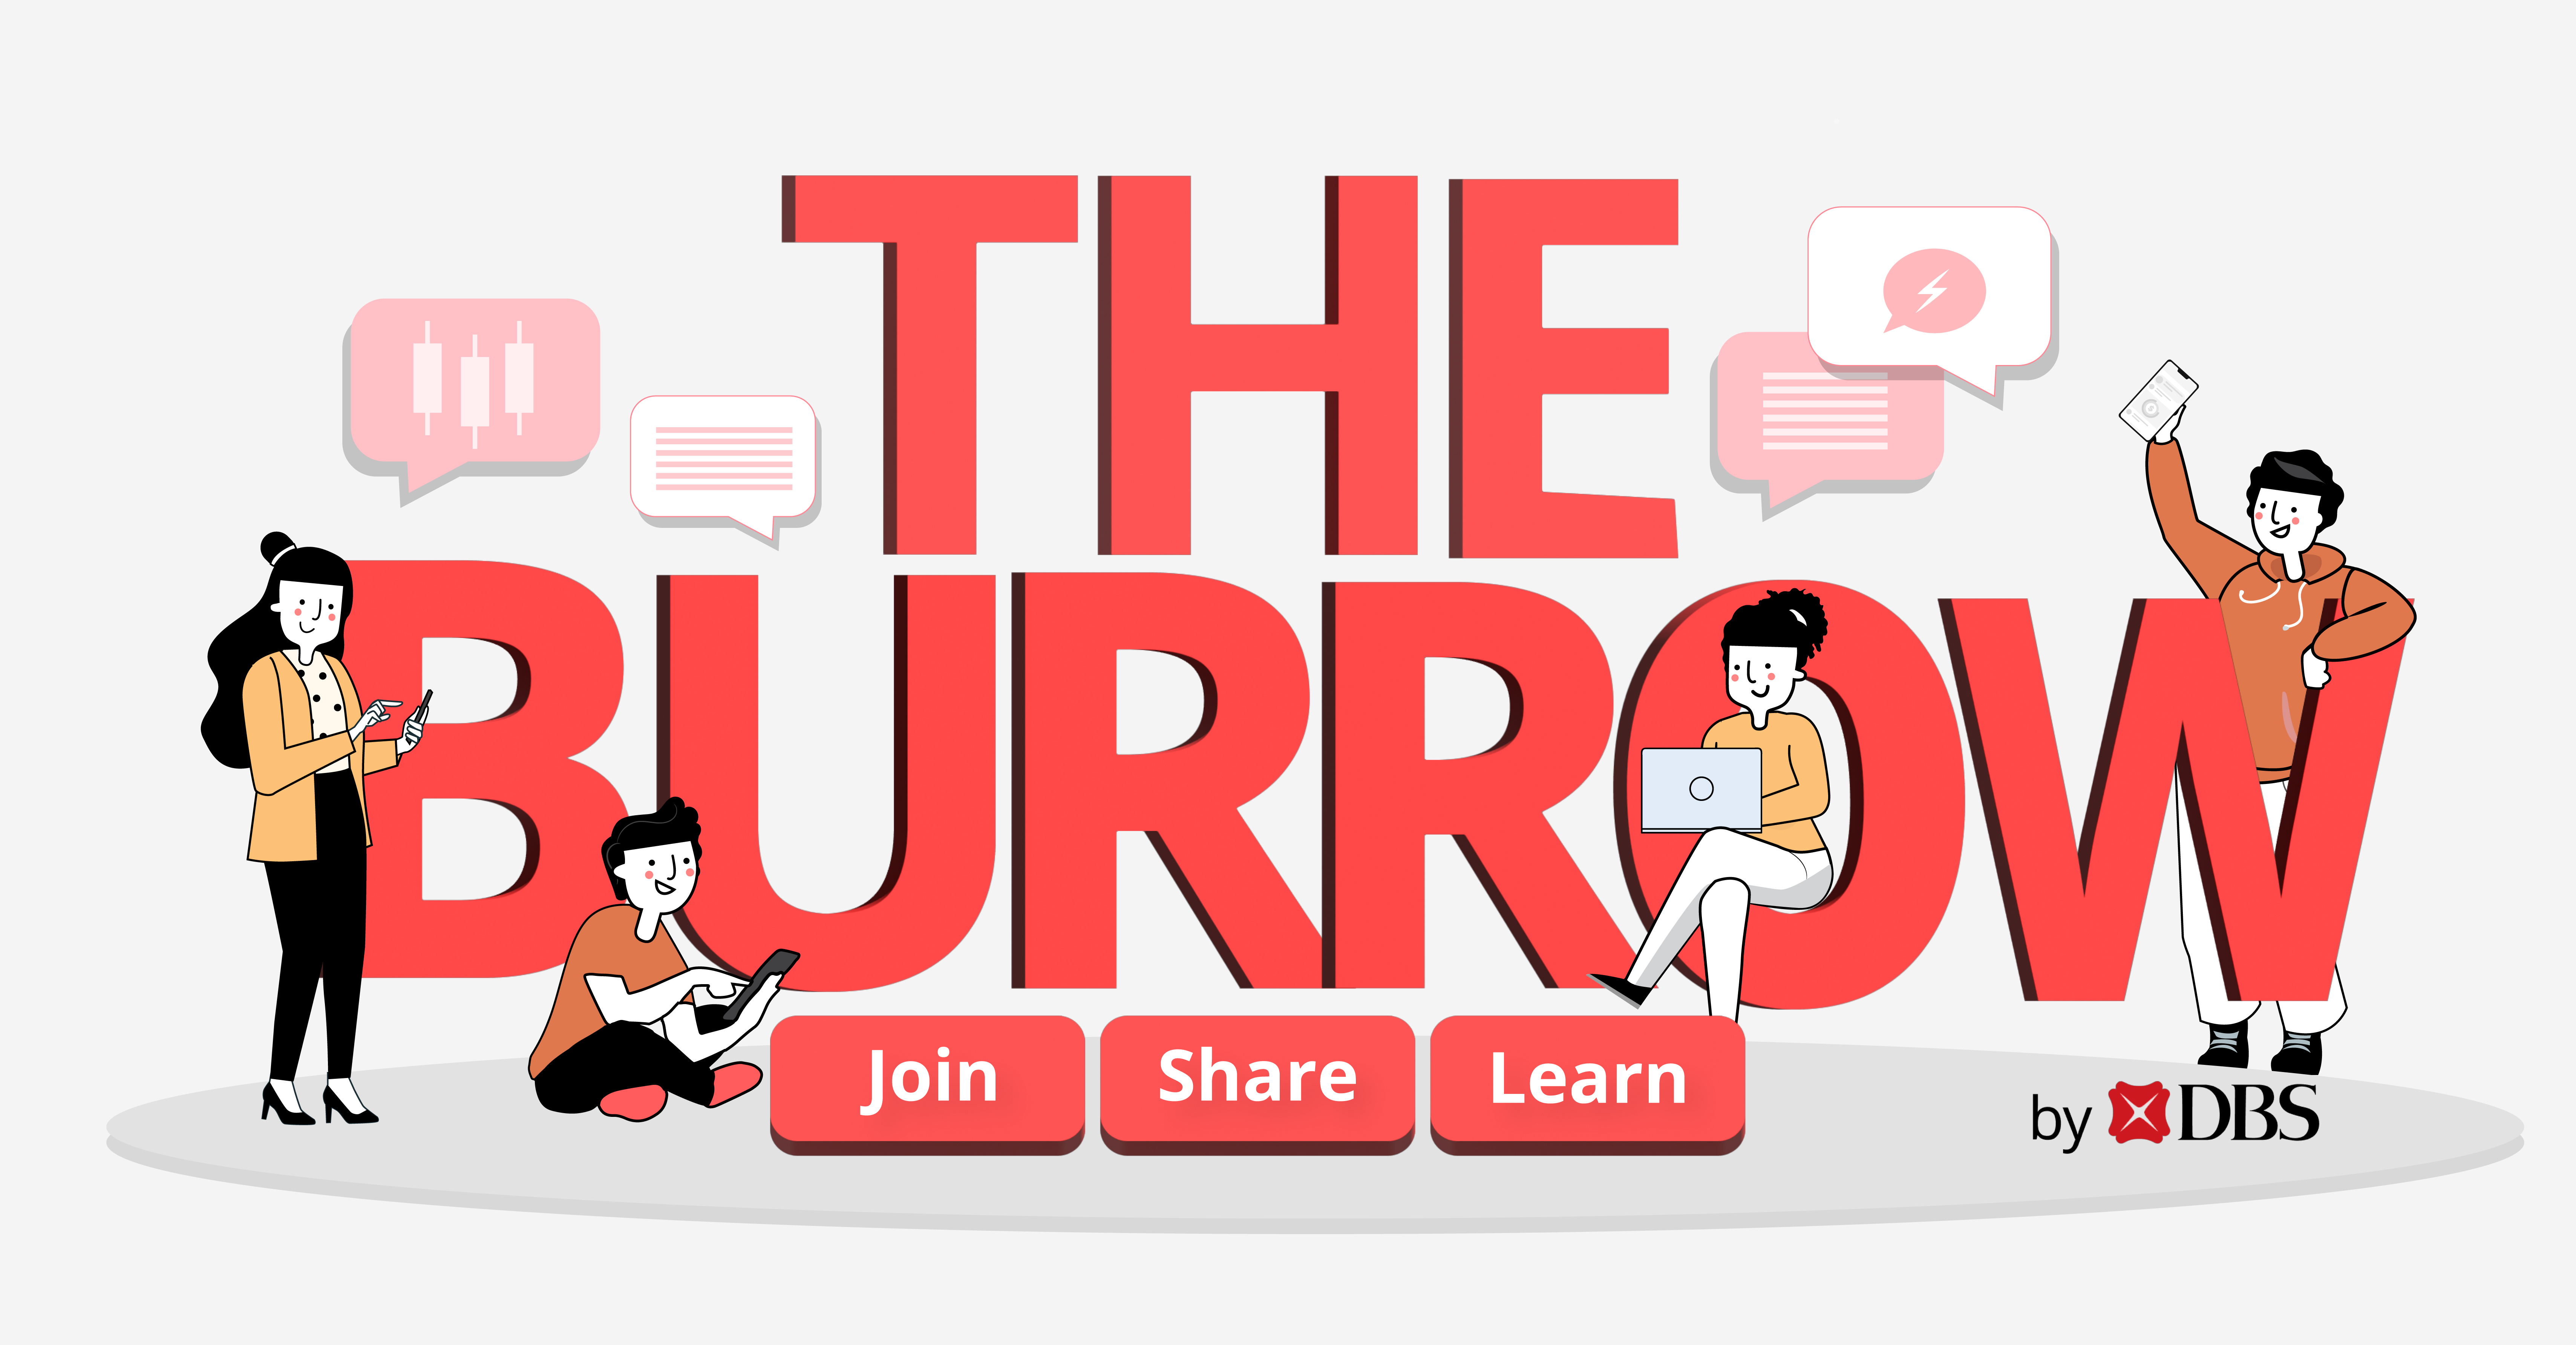 Join The Burrow by DBS - Online Personal Finance Community in Singapore